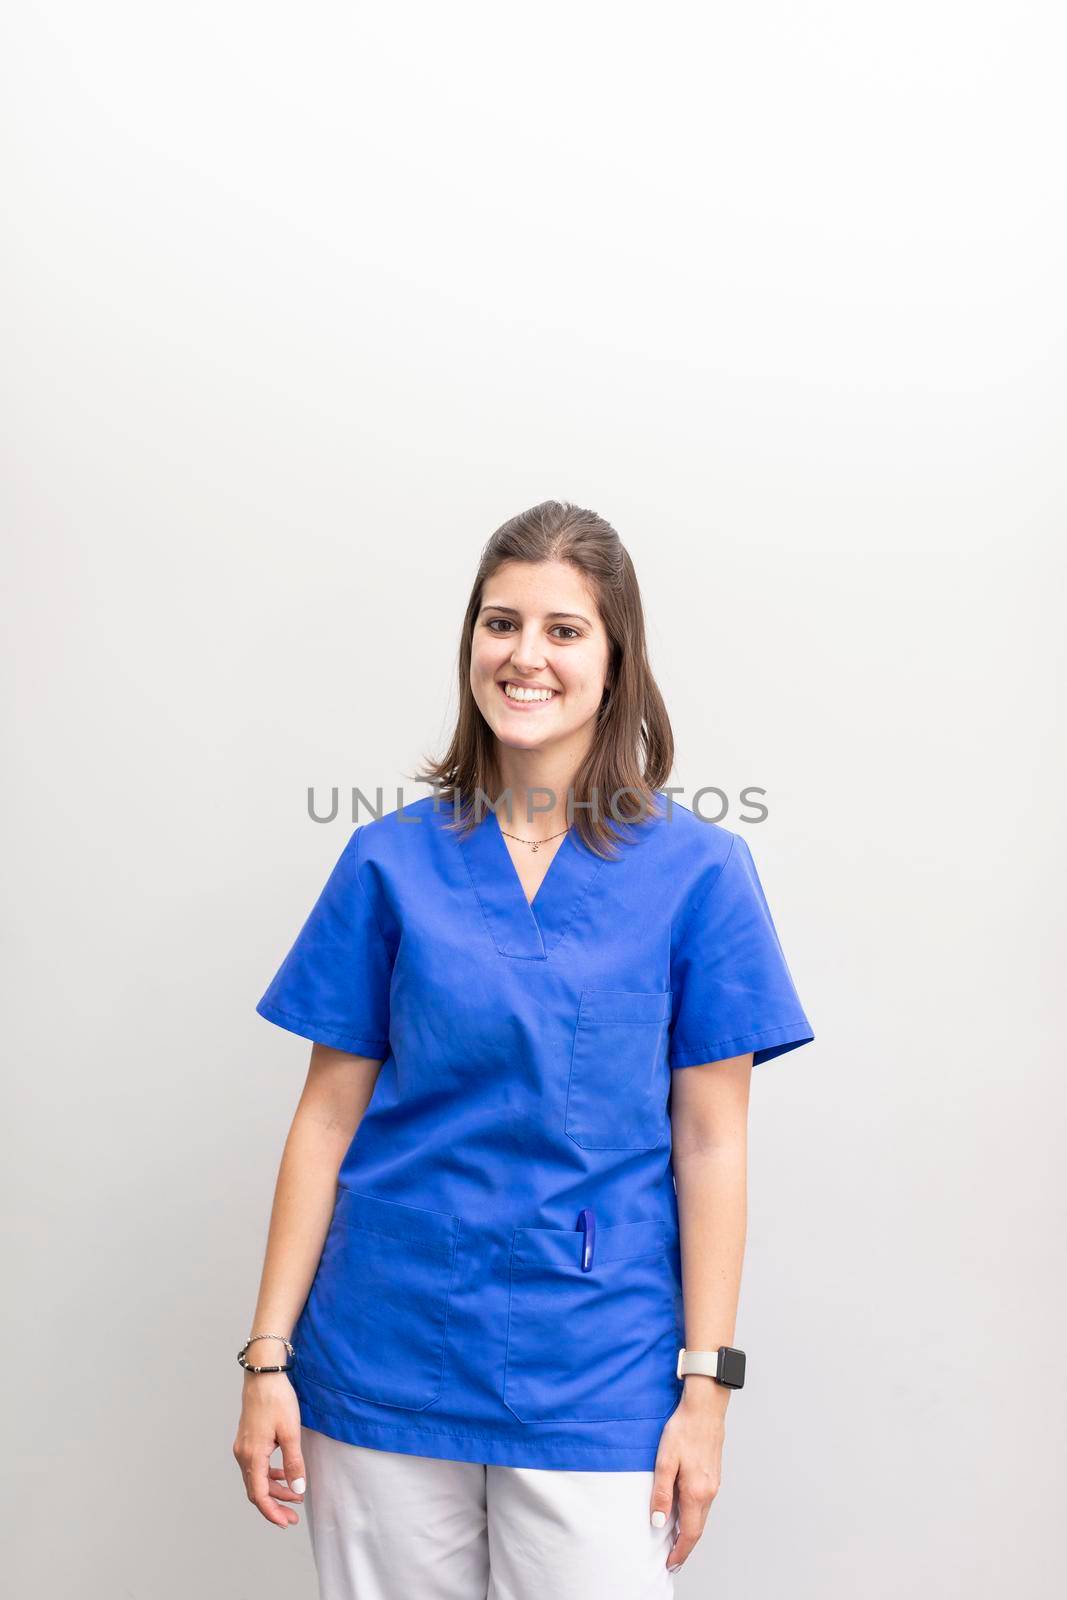 An american shot portrait of a caucasian woman dentist, smiling with joy and looking at camera wearing blue uniform at the dental clinic